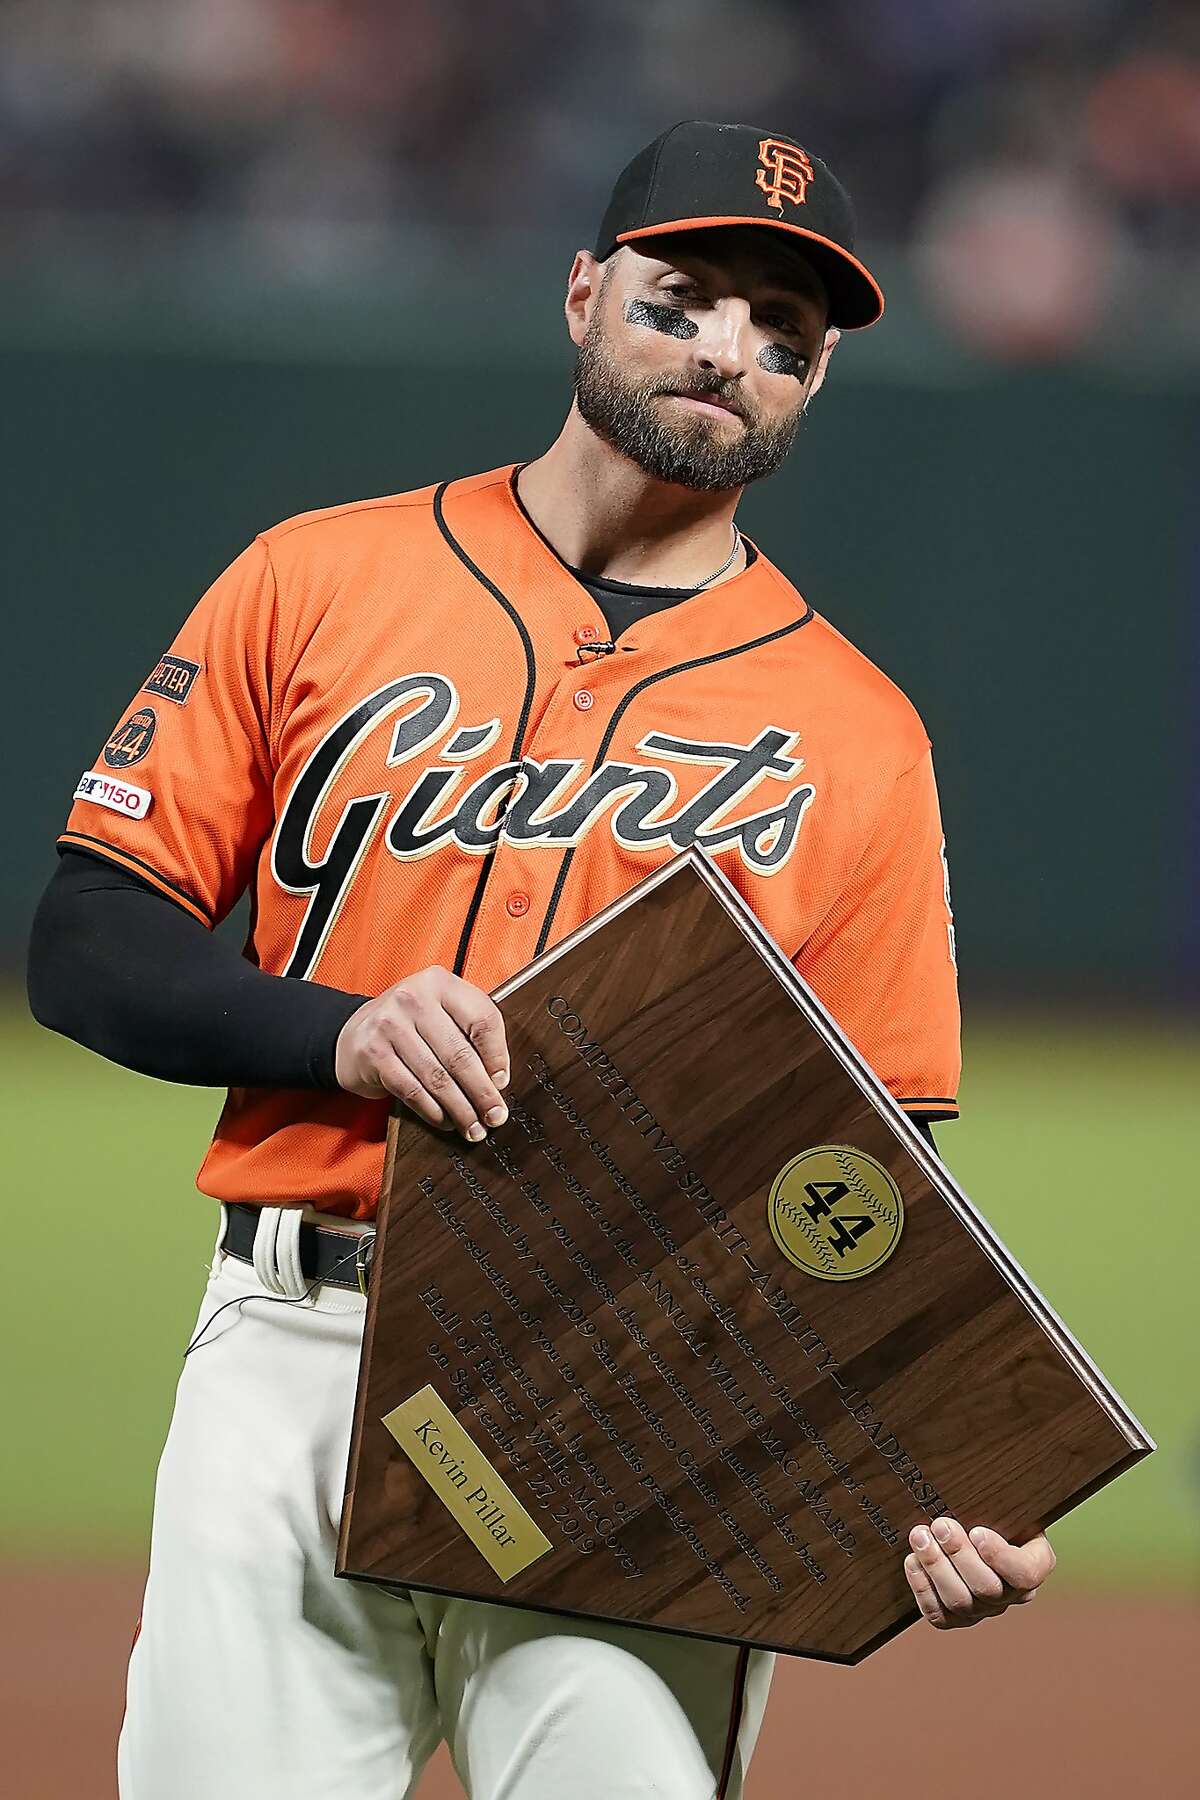 San Francisco Giants center fielder Kevin Pillar, holds the Willie Mac Award in a ceremony before a baseball game against the Los Angeles Dodgers in San Francisco, Friday, Sept. 27, 2019. The Willie Mac award is presented to the player on the Giants who best exemplifies the spirit and leadership consistently shown by Willie McCovey throughout his long career. (AP Photo/Tony Avelar)